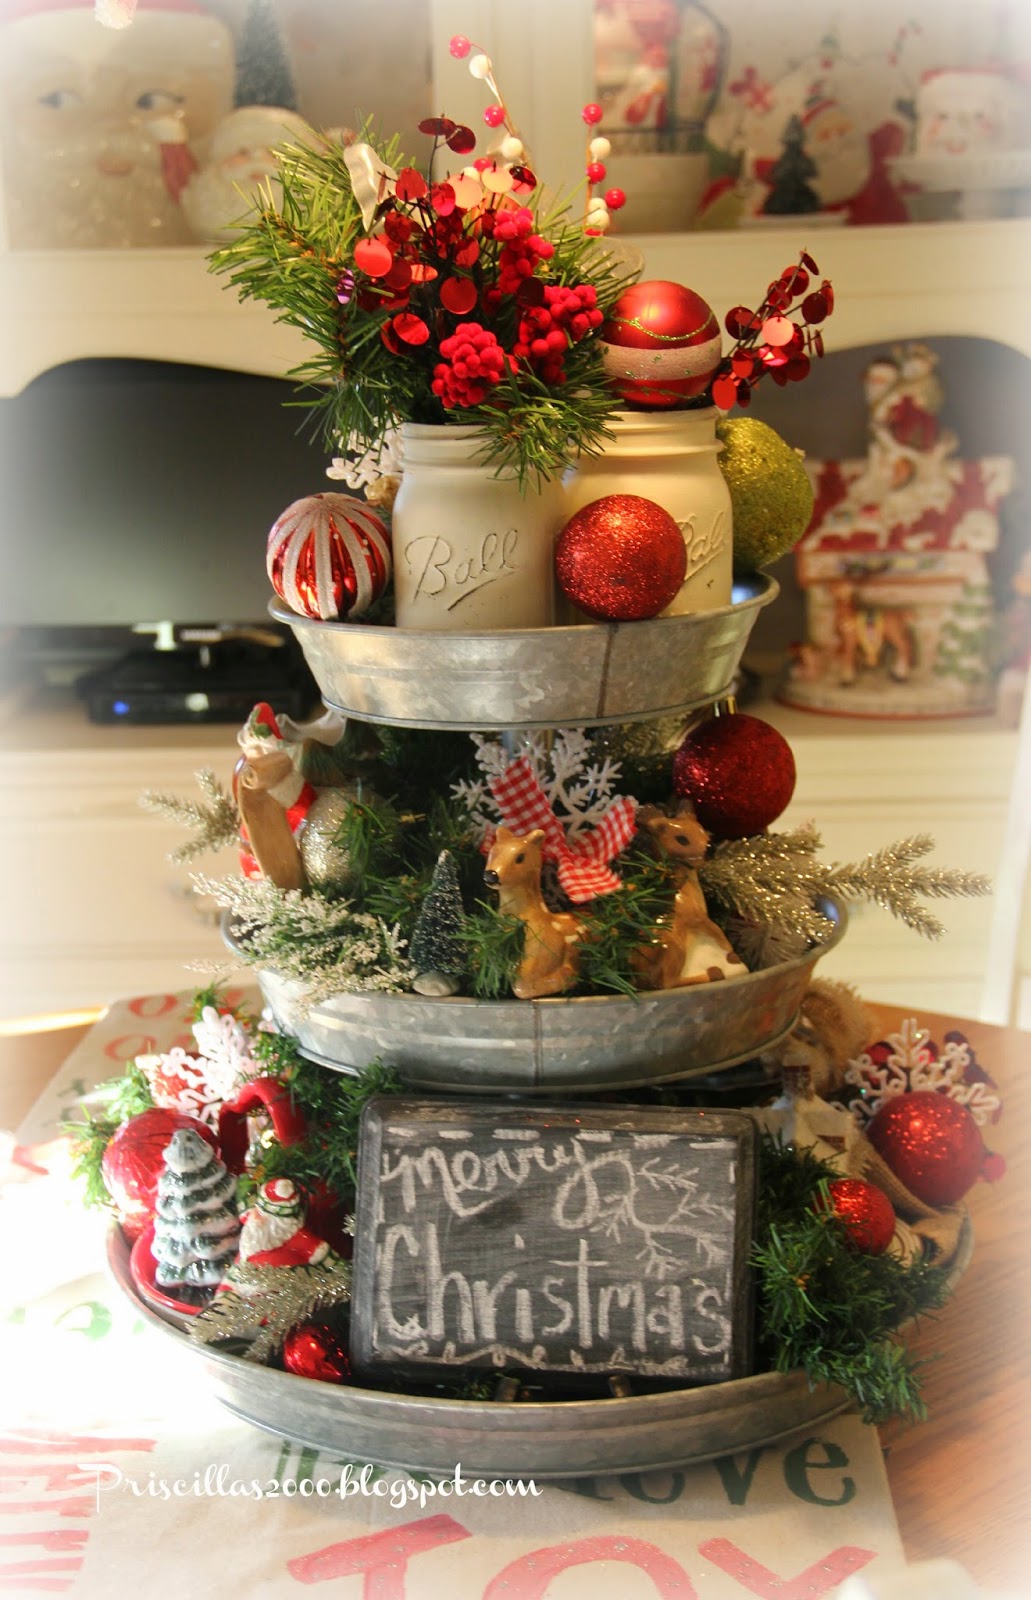 Pricilla's Galvanized Christmas Centerpiece-Treasure Hunt Thursday- From My Front Porch To Yours